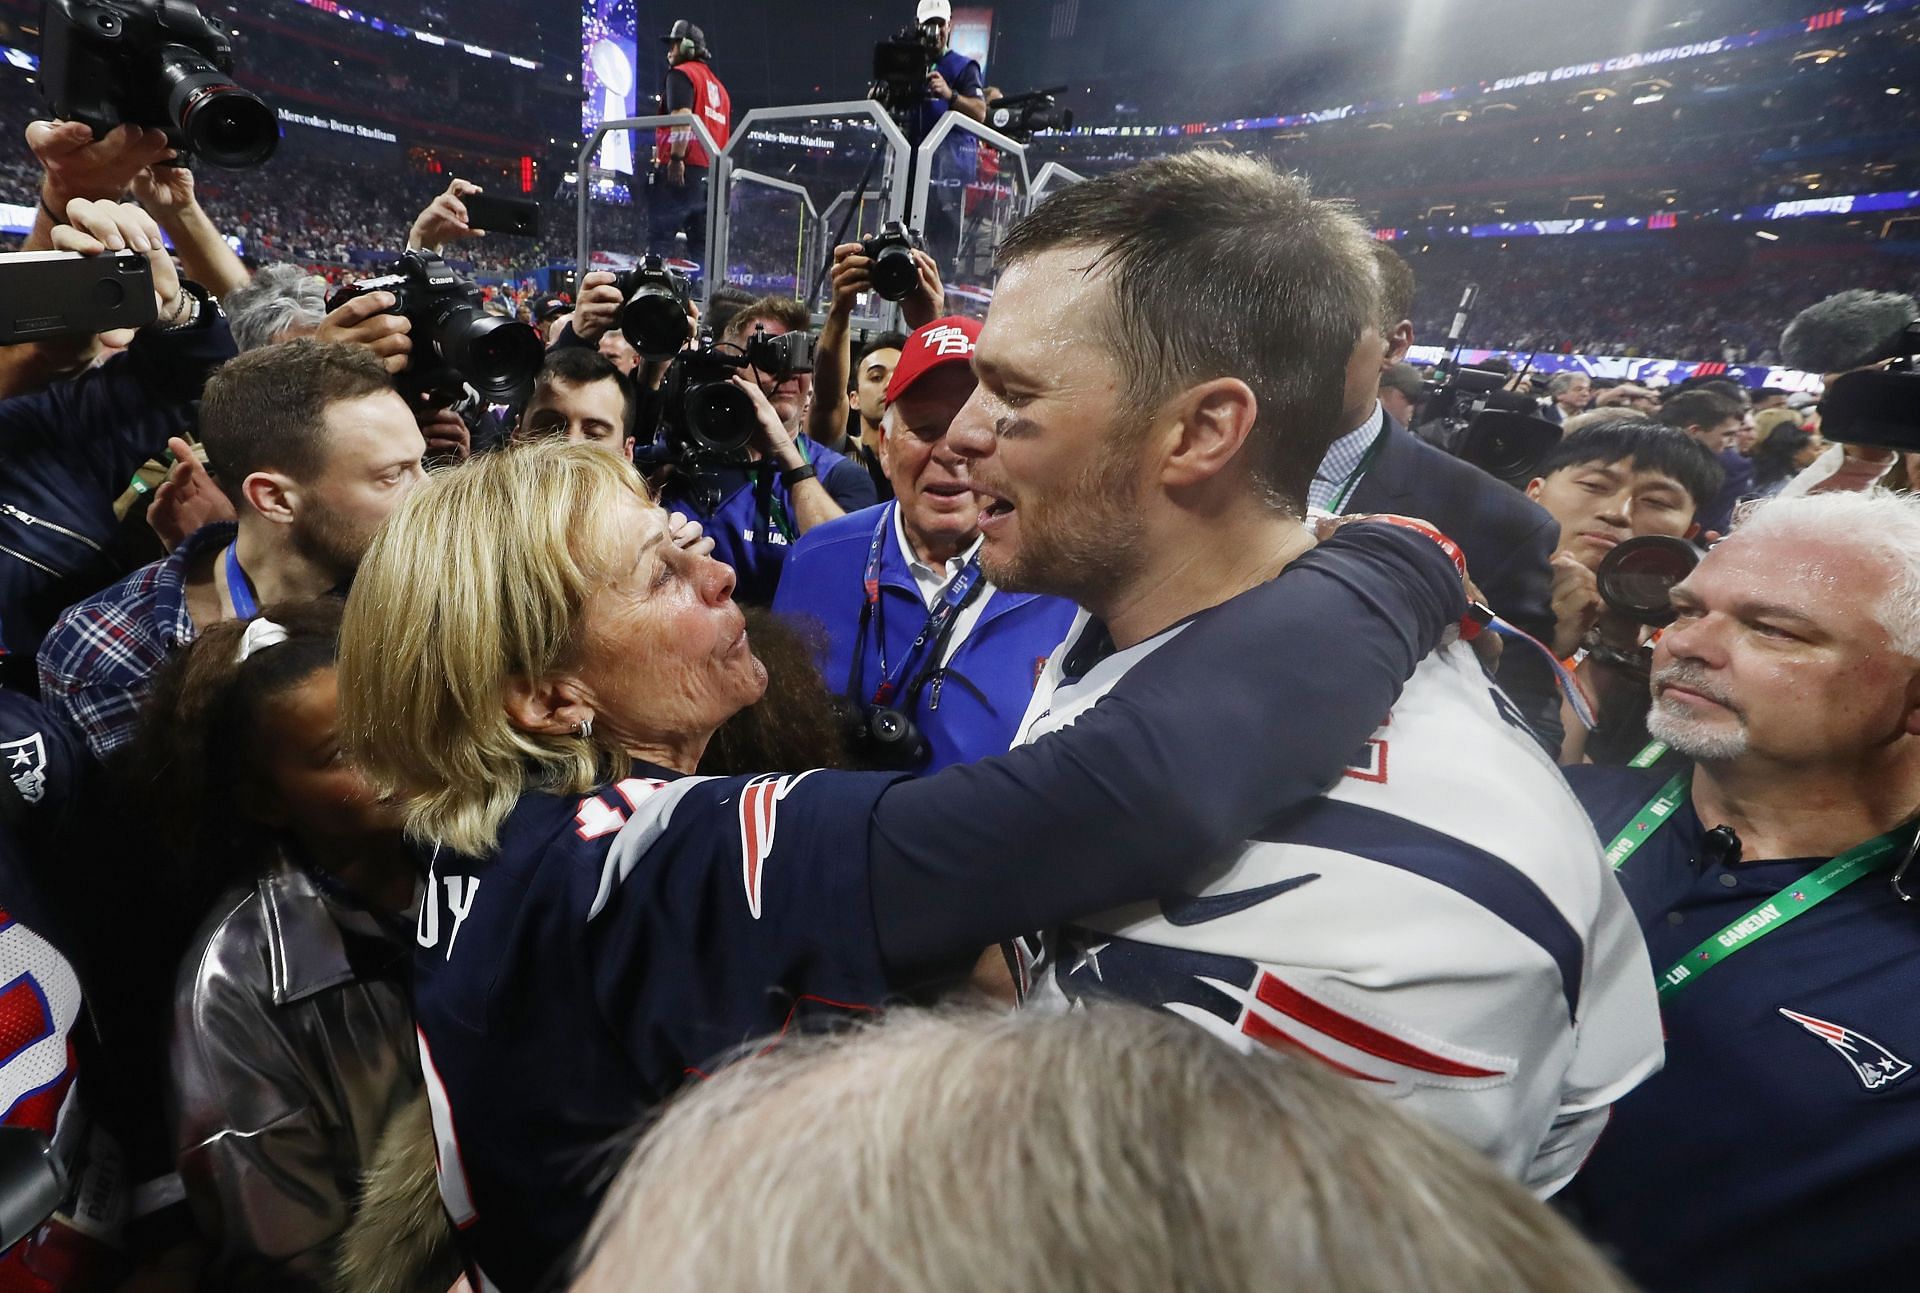 Tom Brady celebrates winning the Super Bowl with his mother